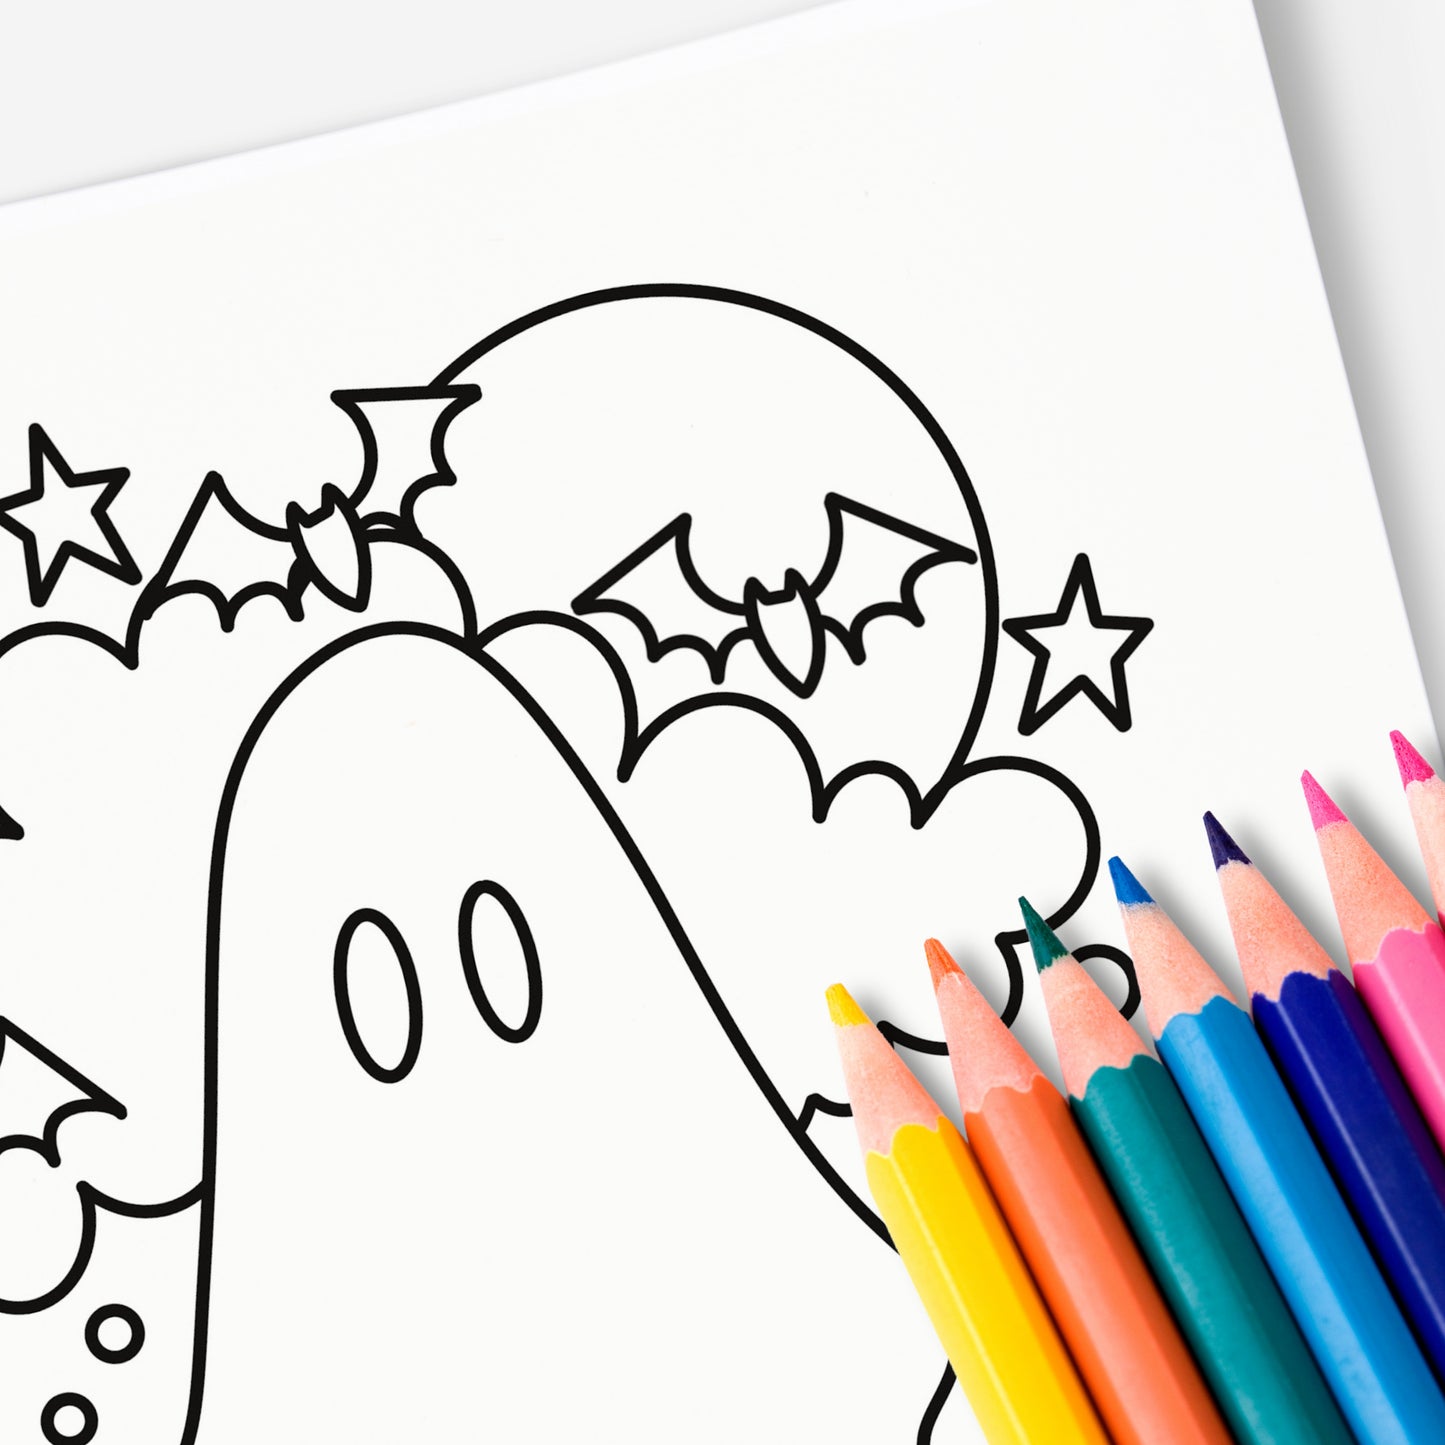 10 Pk Halloween Printable Coloring Book 10Pk Coloring Pages | Hand-Drawn Ghost Pumpkin Spooky | Creative Therapeutic Color Activity Time